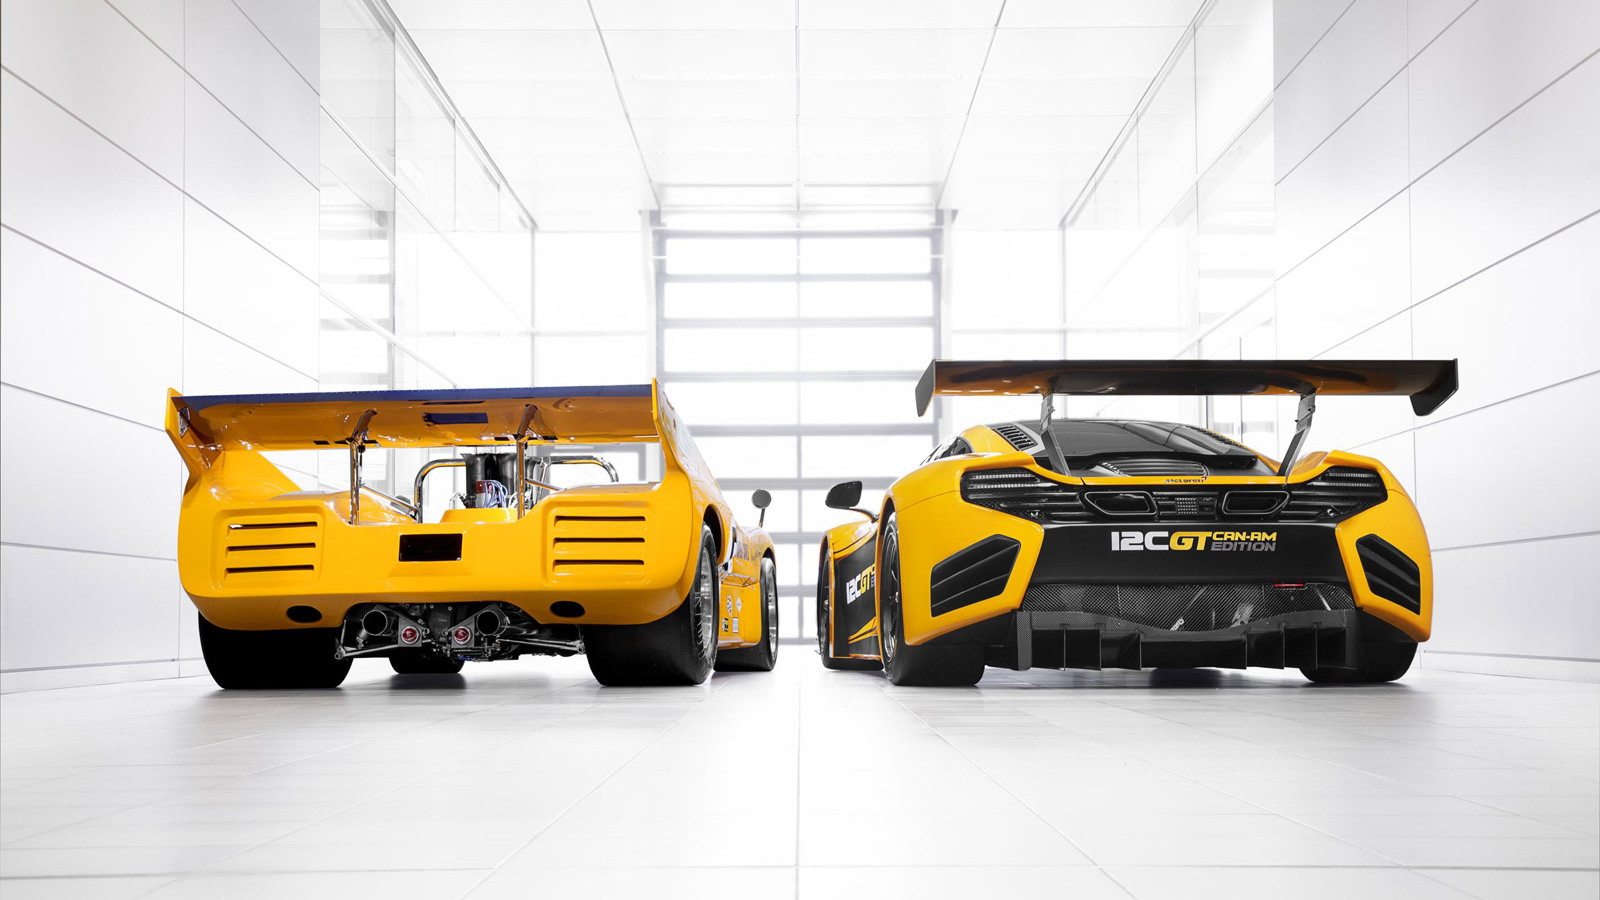 McLaren Can-Am race cars - past and present